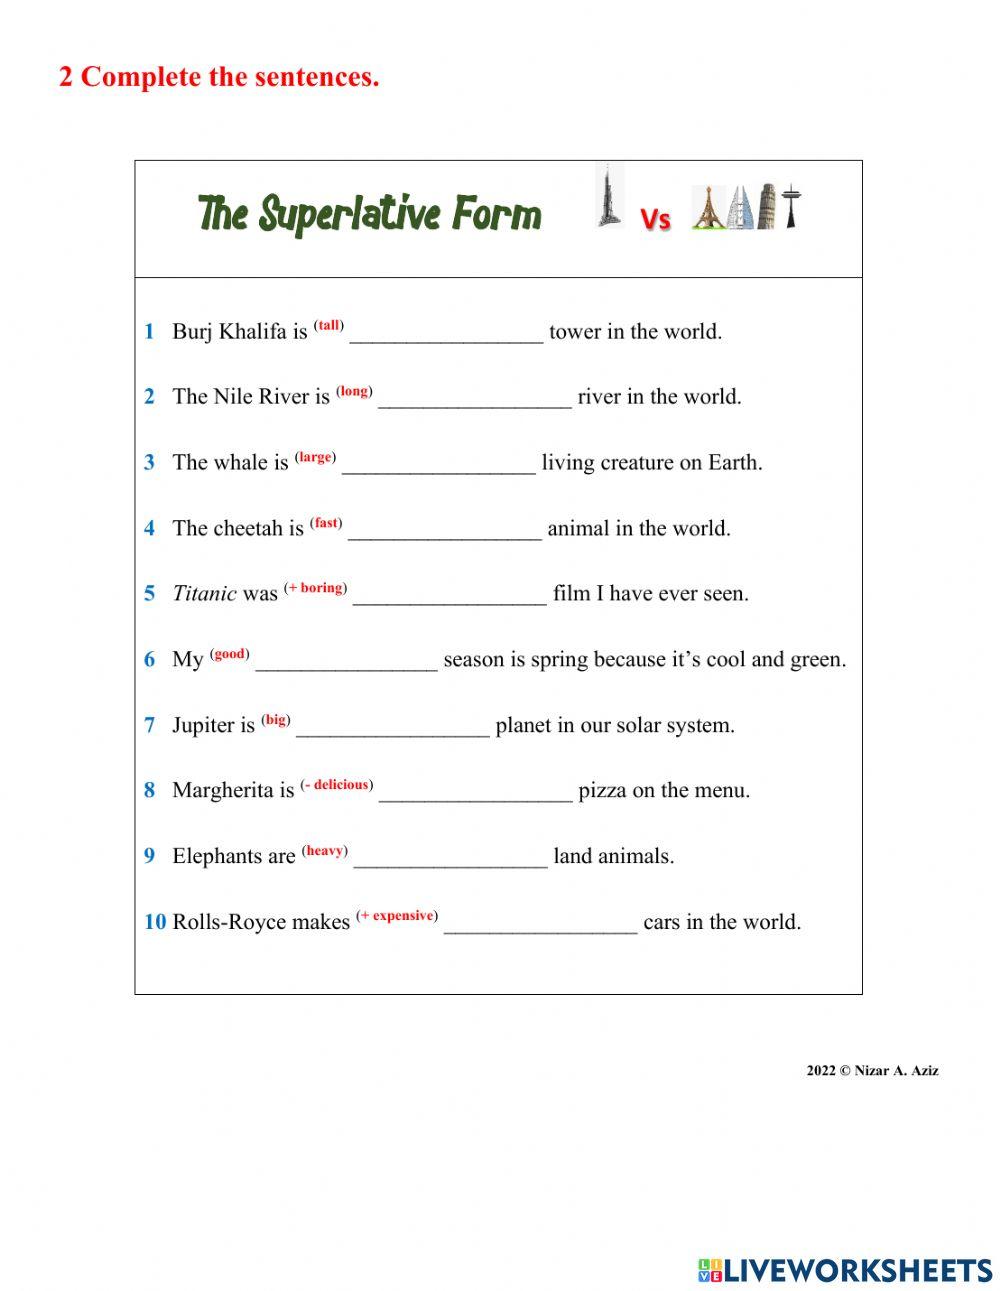 The Comparative and the Superlative Forms